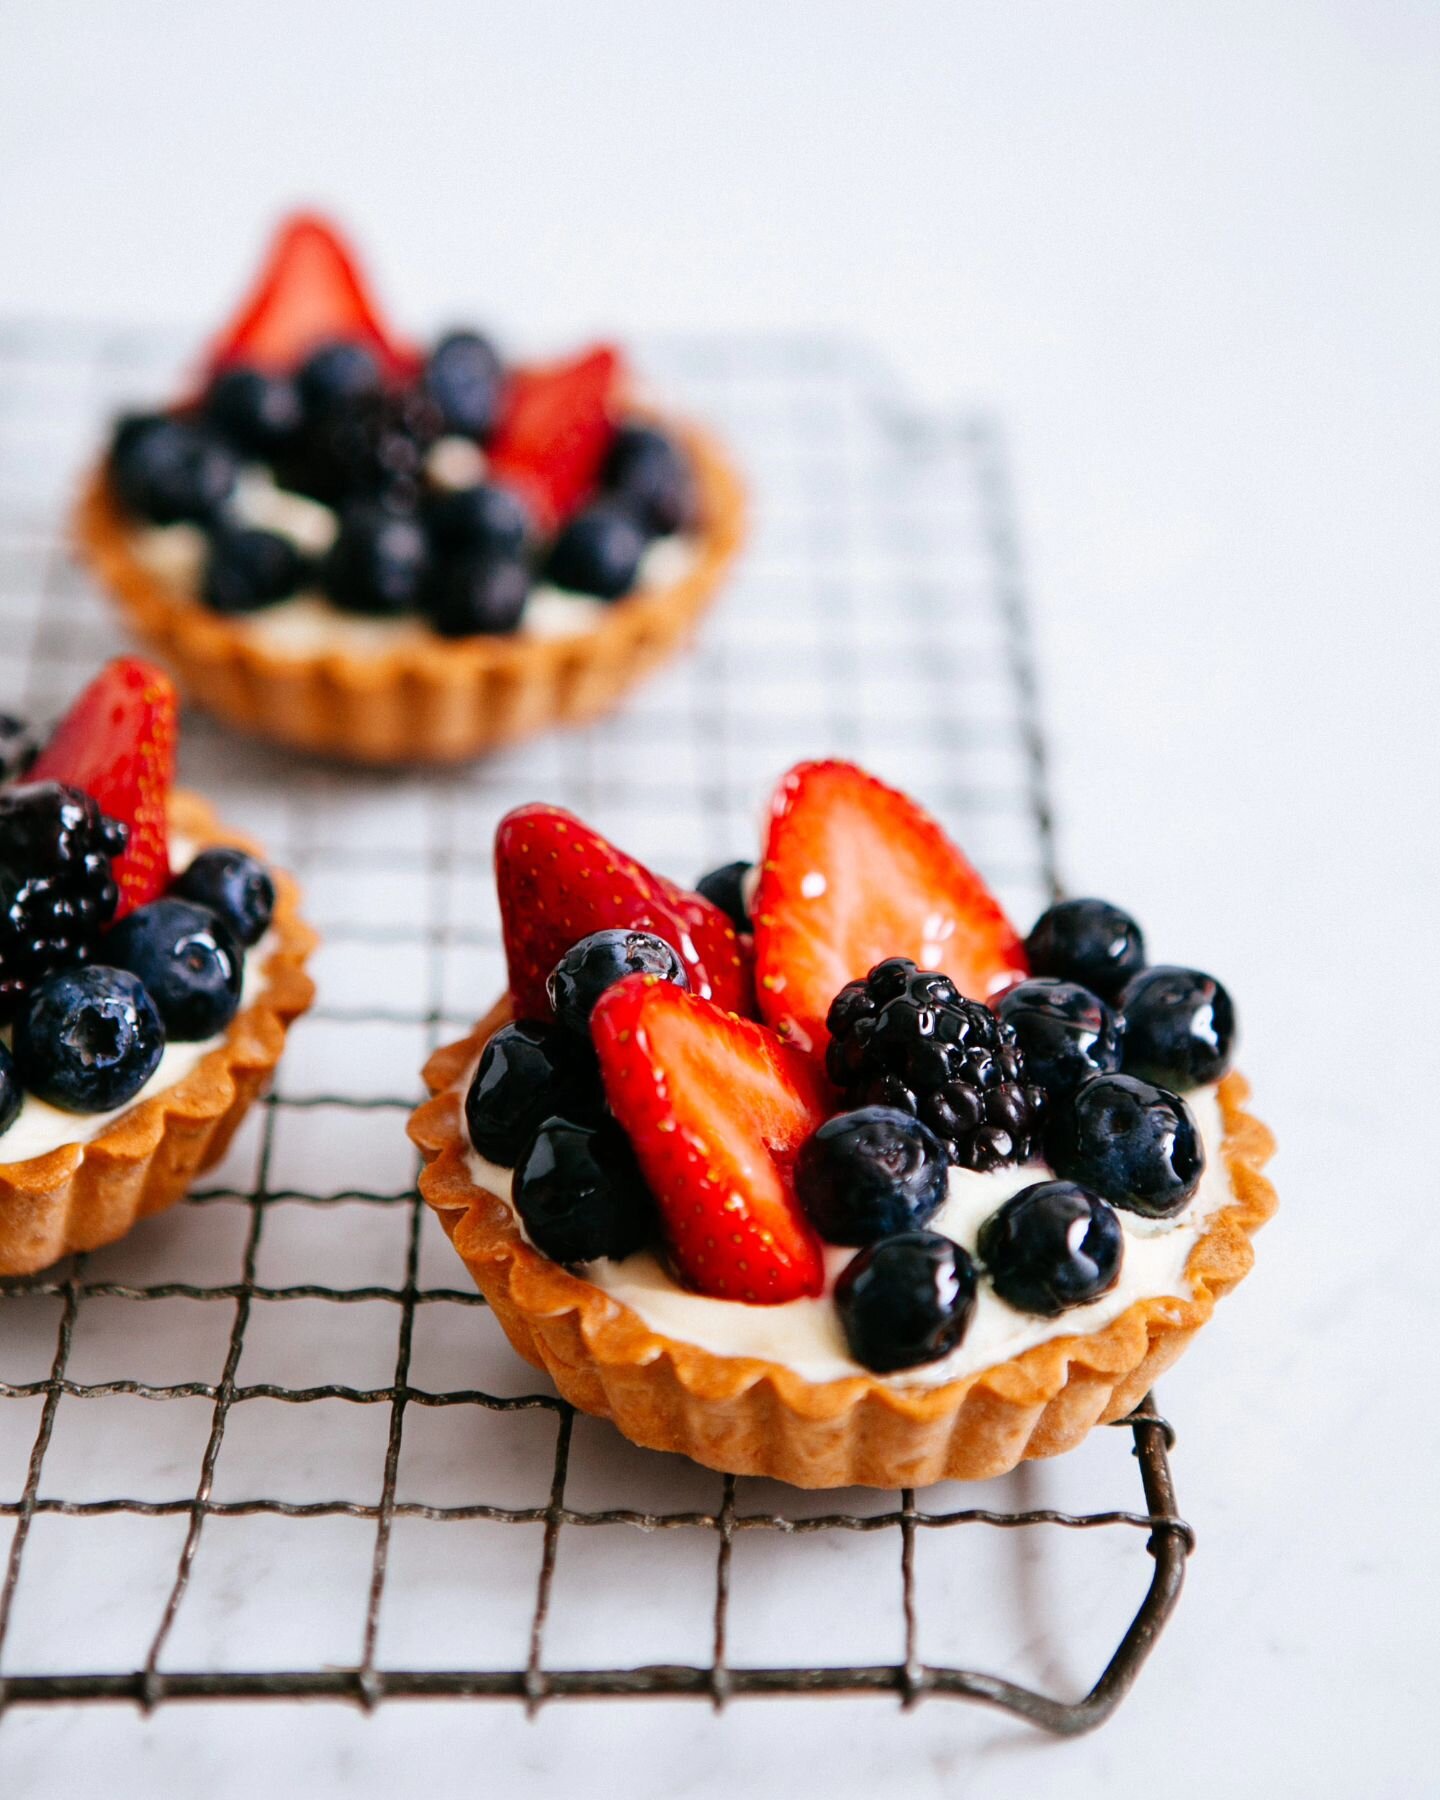 It's never too early to have fruit tarts, right?

#rowaleephography